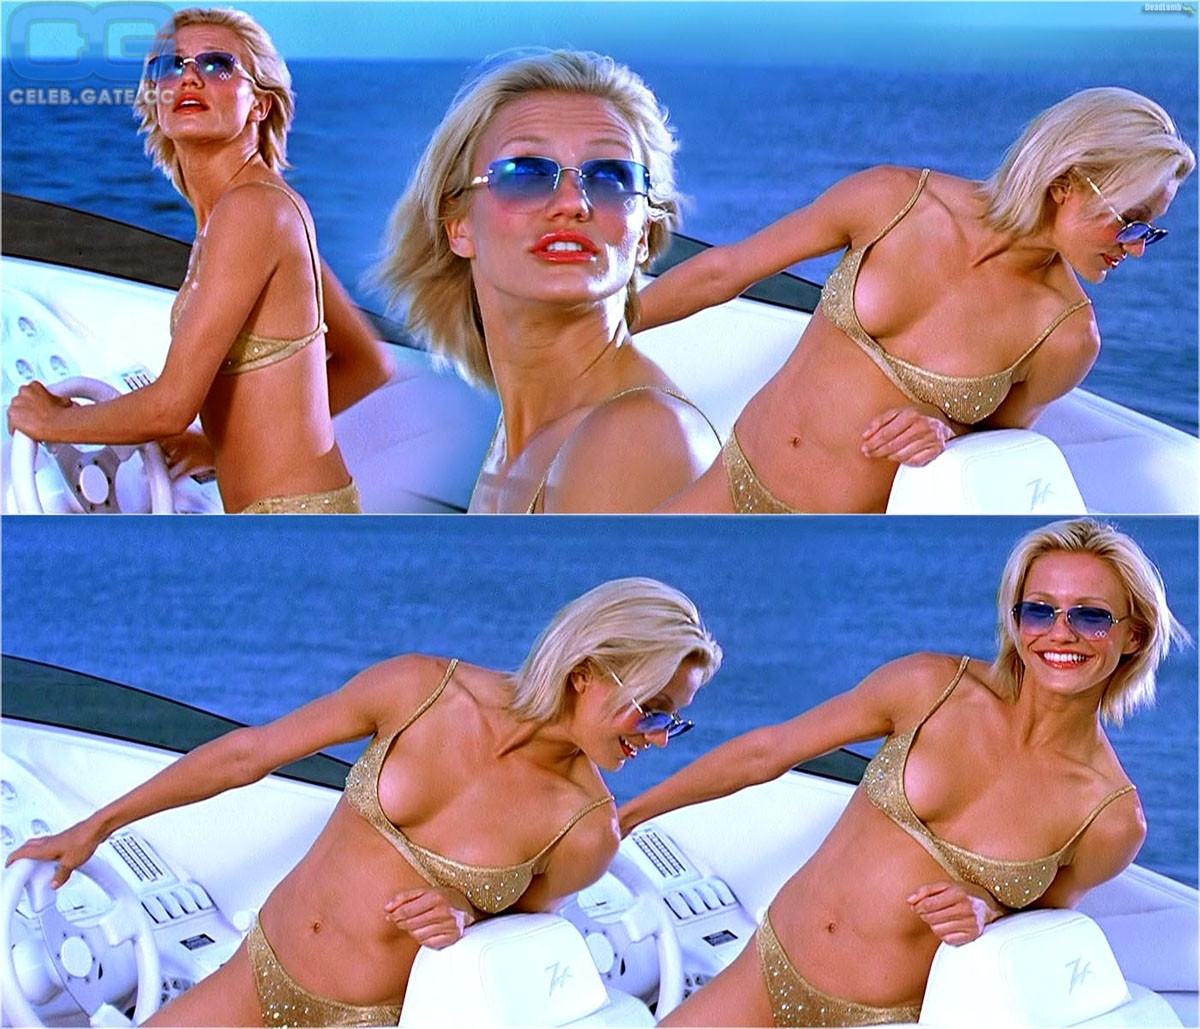 Cameron diaz the fappening